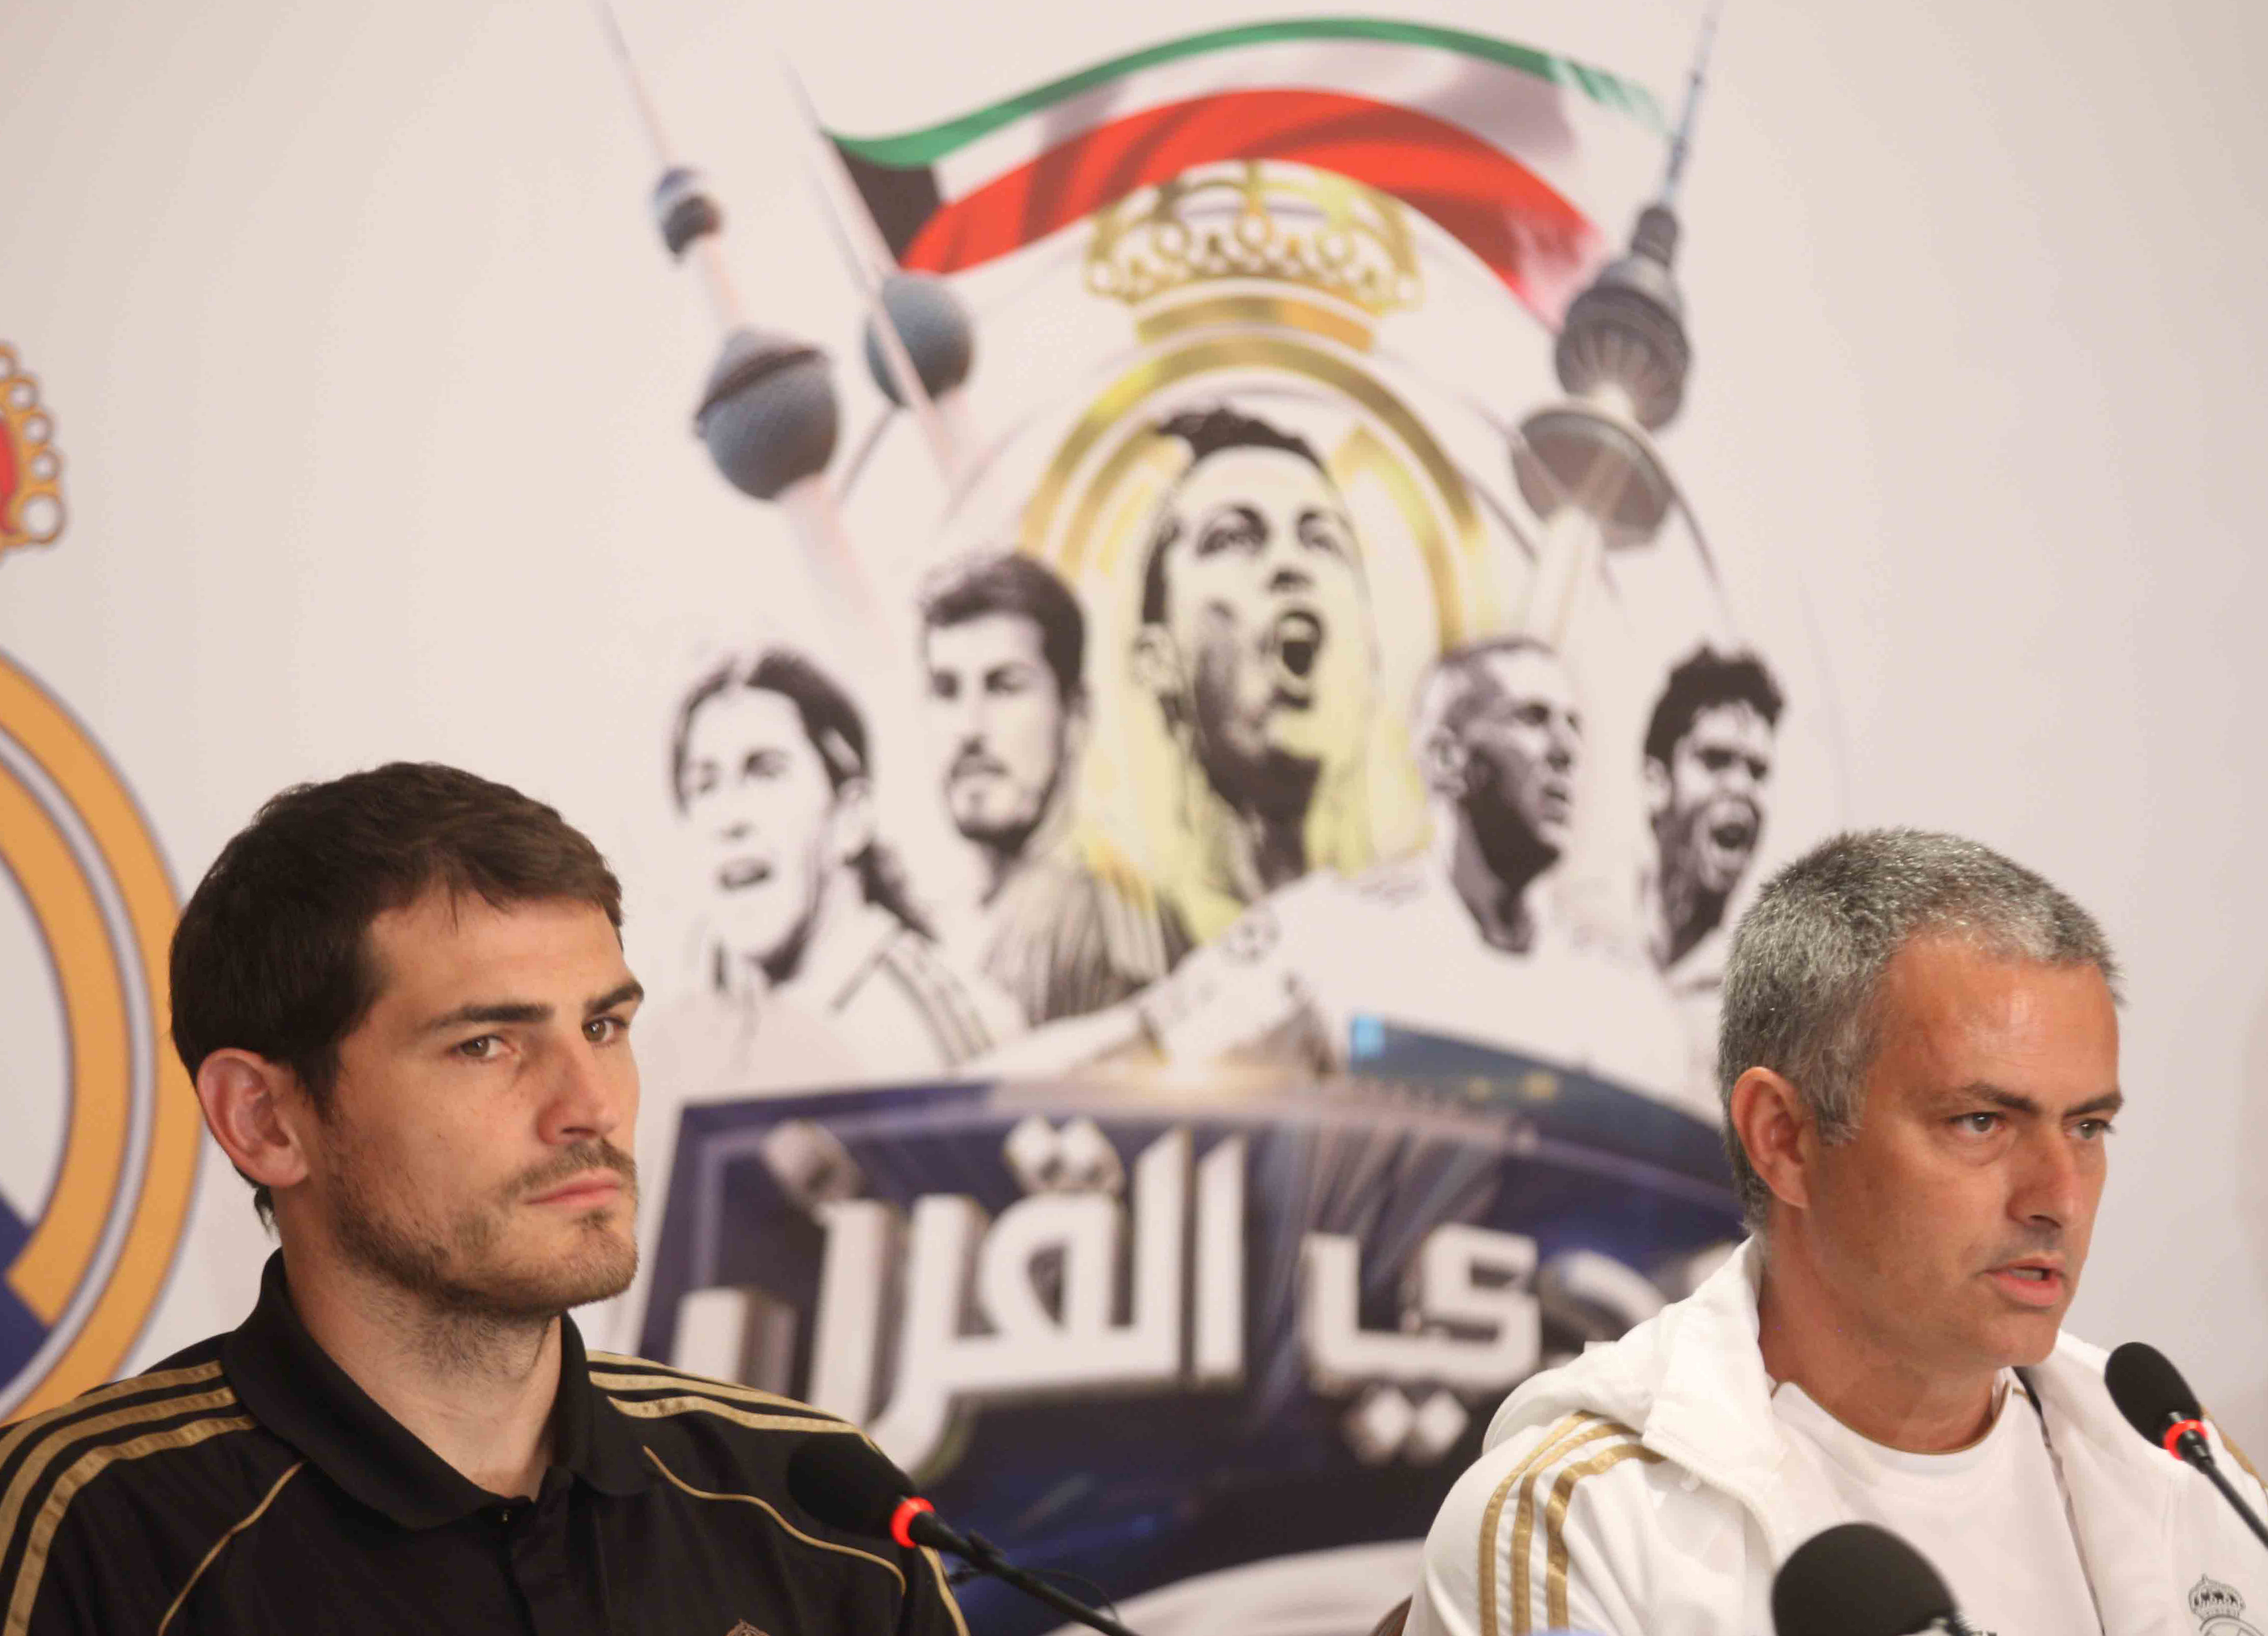 Portuguese manager of the Real Madrid football team, Jose Mourinho (R), and Captain, Iker Casillas, attend a press conference in Kuwait City on May 15, 2012. Real Madrid are to play a friendly match against Kuwait’s national football team on May 16, at al-Kuwait SC stadium in Kuwait City. AFP PHOTO / YASSER AL-ZAYYAT        (Photo credit should read YASSER AL-ZAYYAT/AFP/GettyImages)